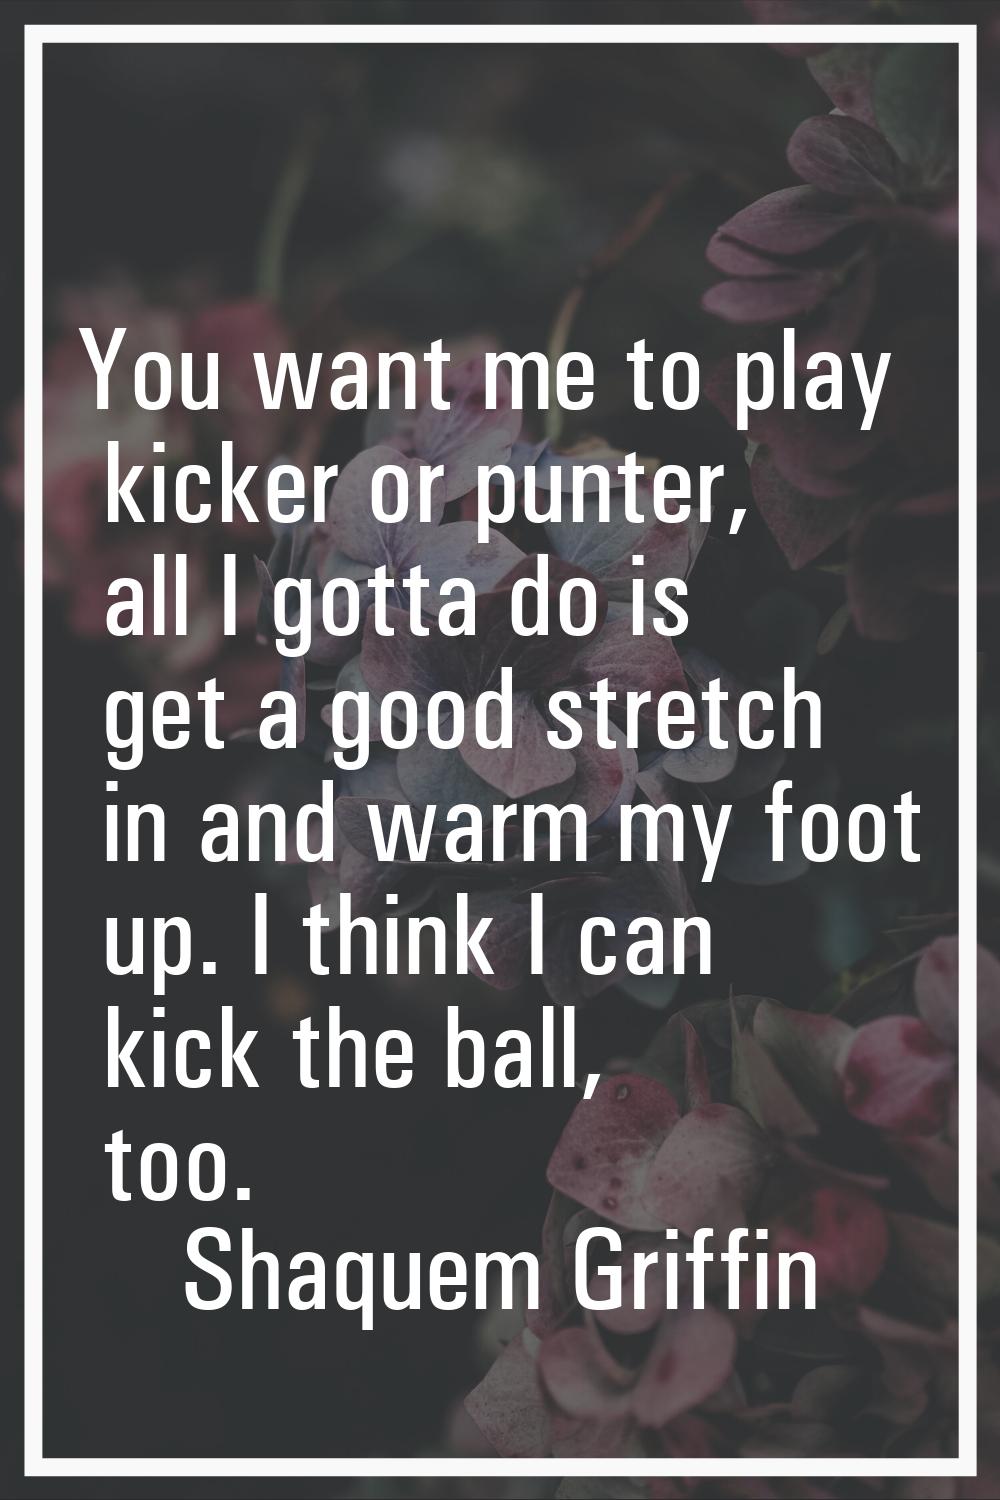 You want me to play kicker or punter, all I gotta do is get a good stretch in and warm my foot up. 